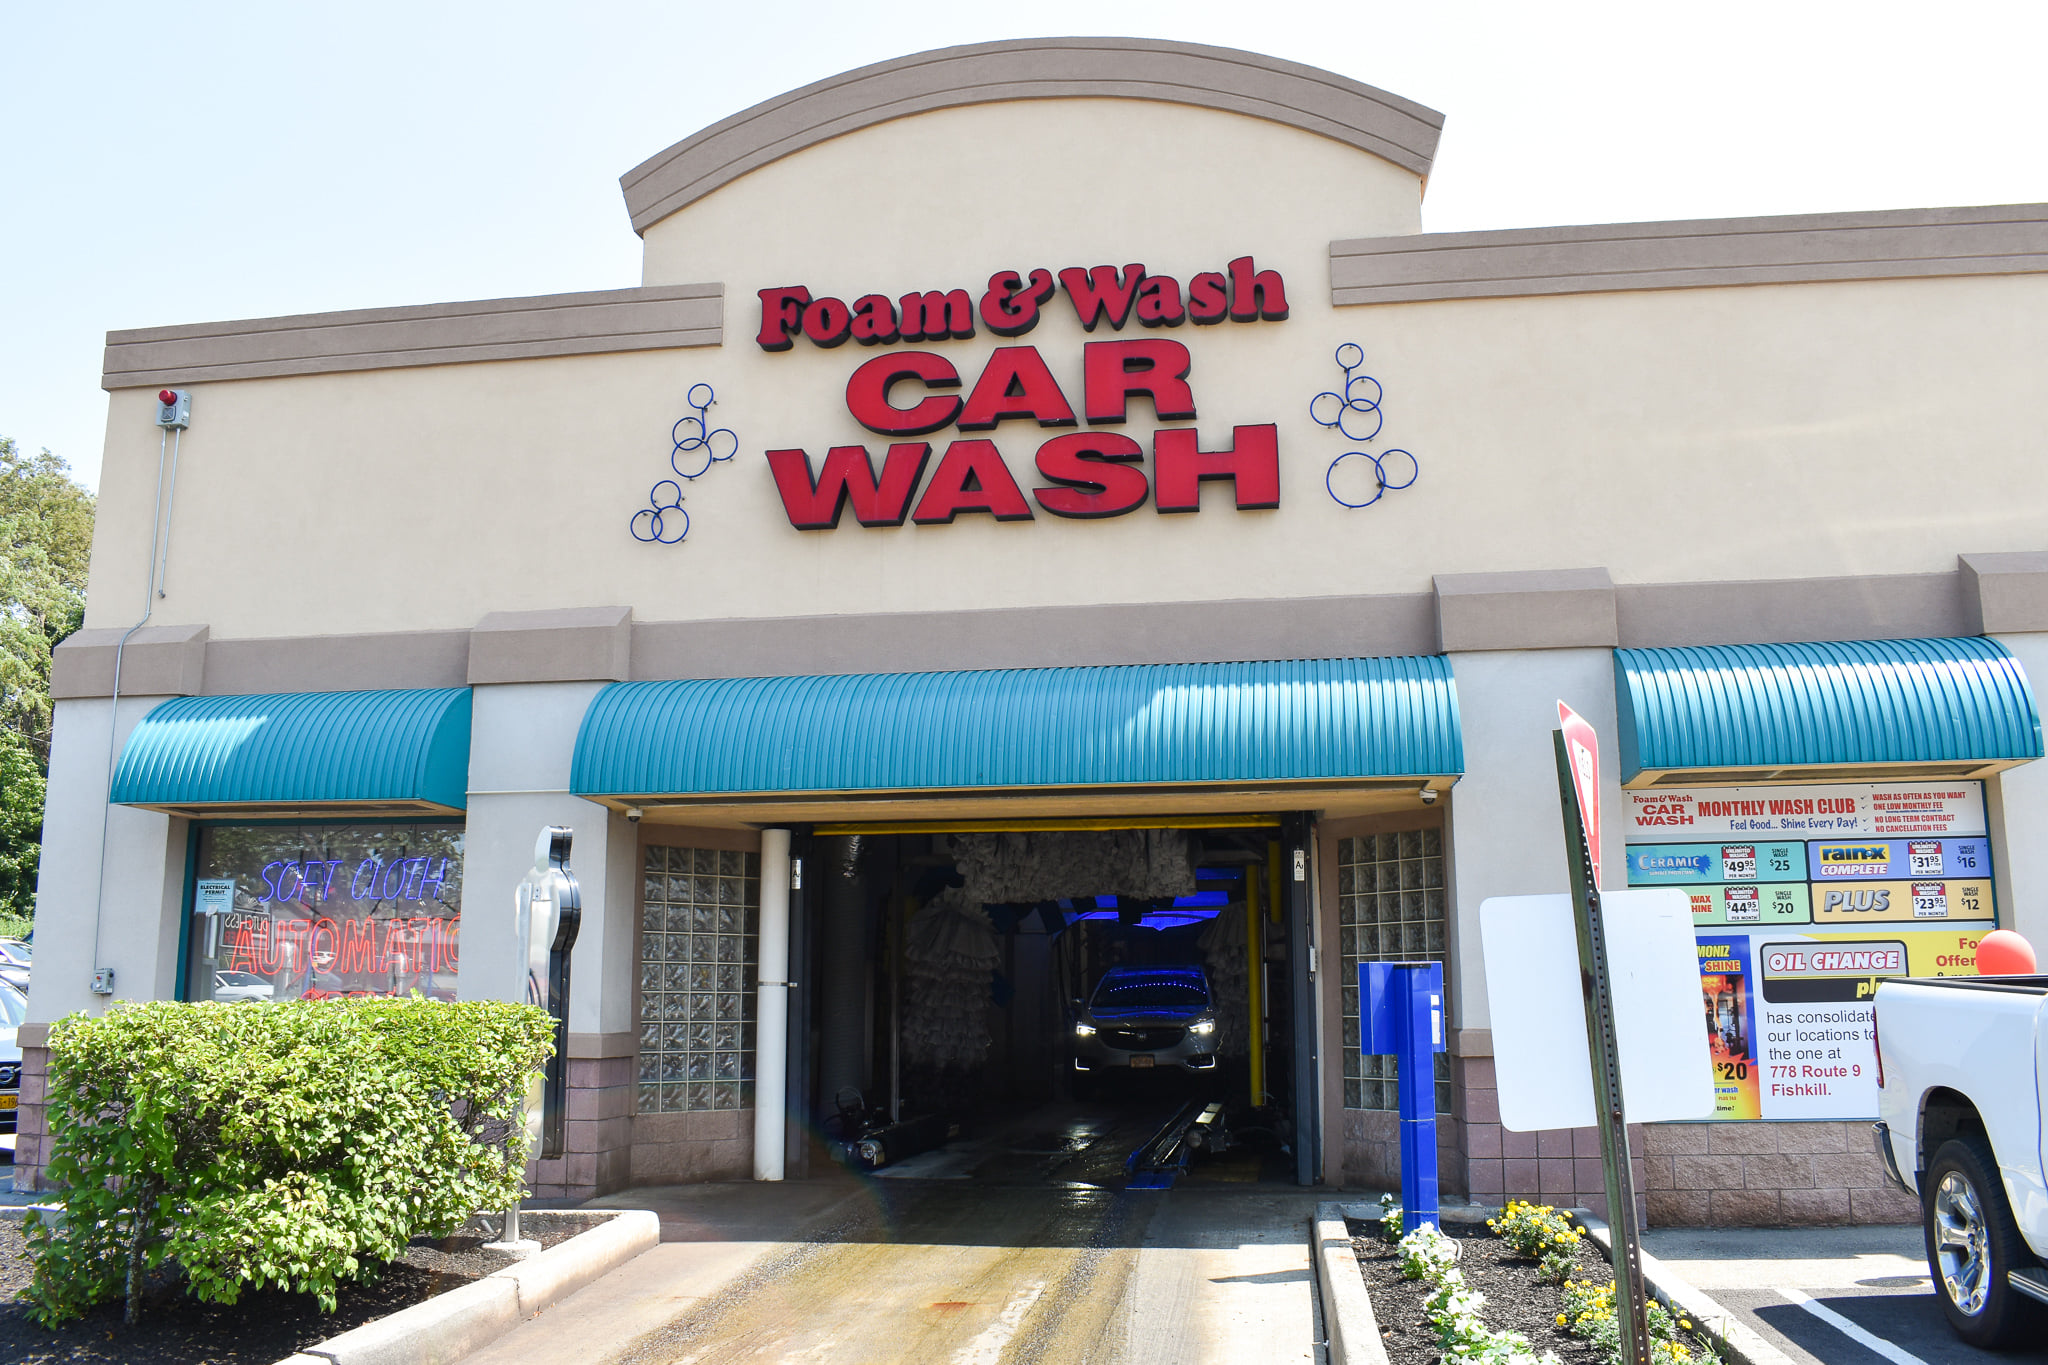 Touchless carwash opens in Grand Rapids